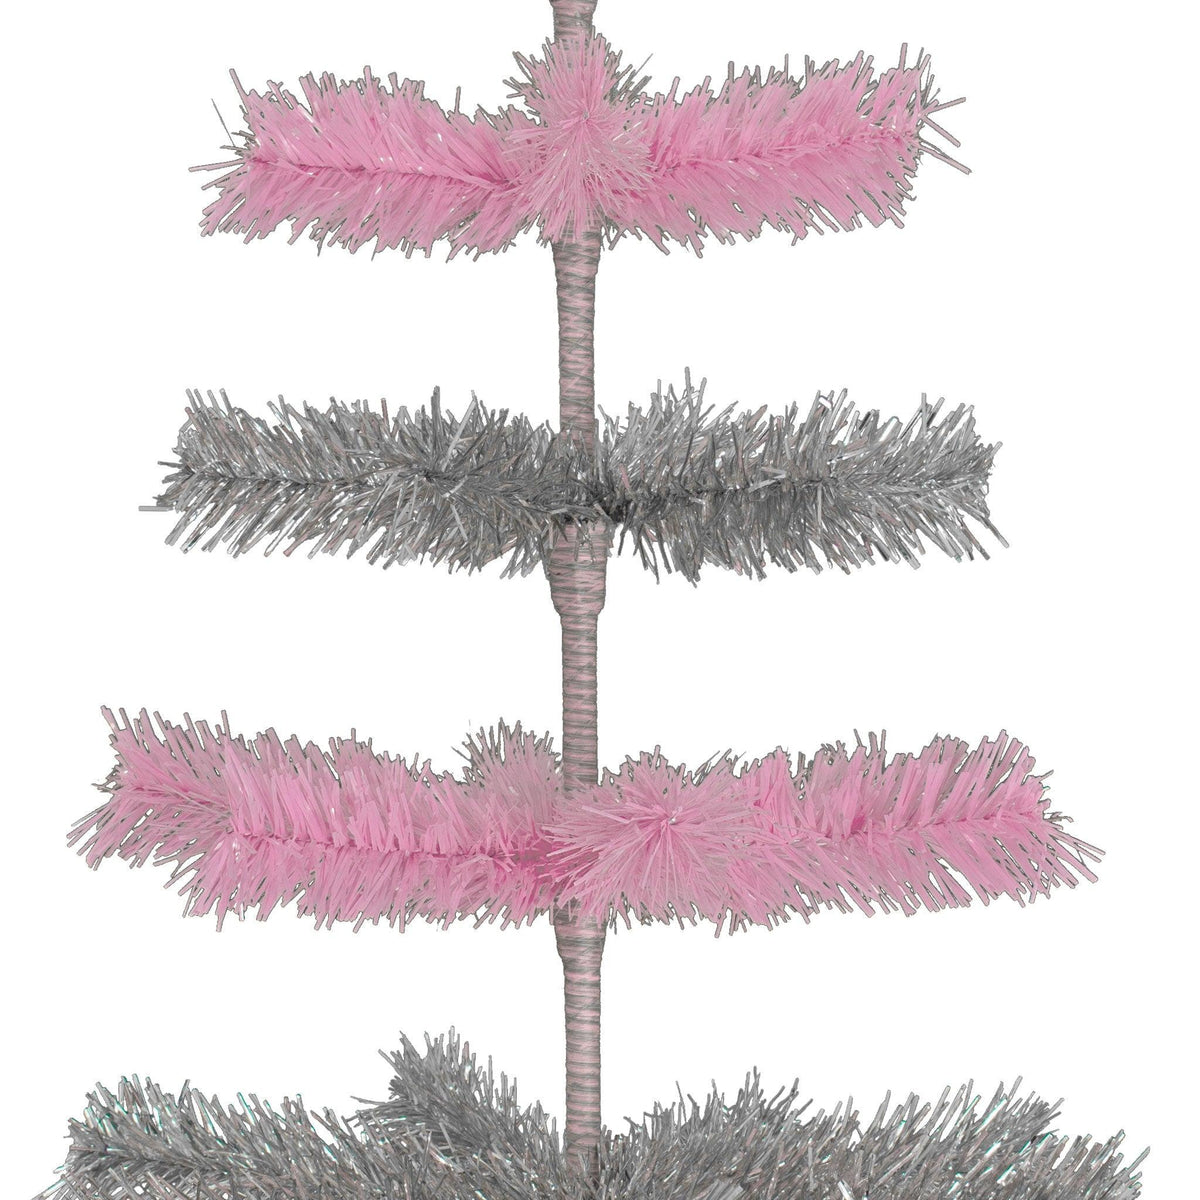 48in tall Pink & Silver Layered Tinsel Christmas Trees made by hand in the USA on sale at leedisplay.com